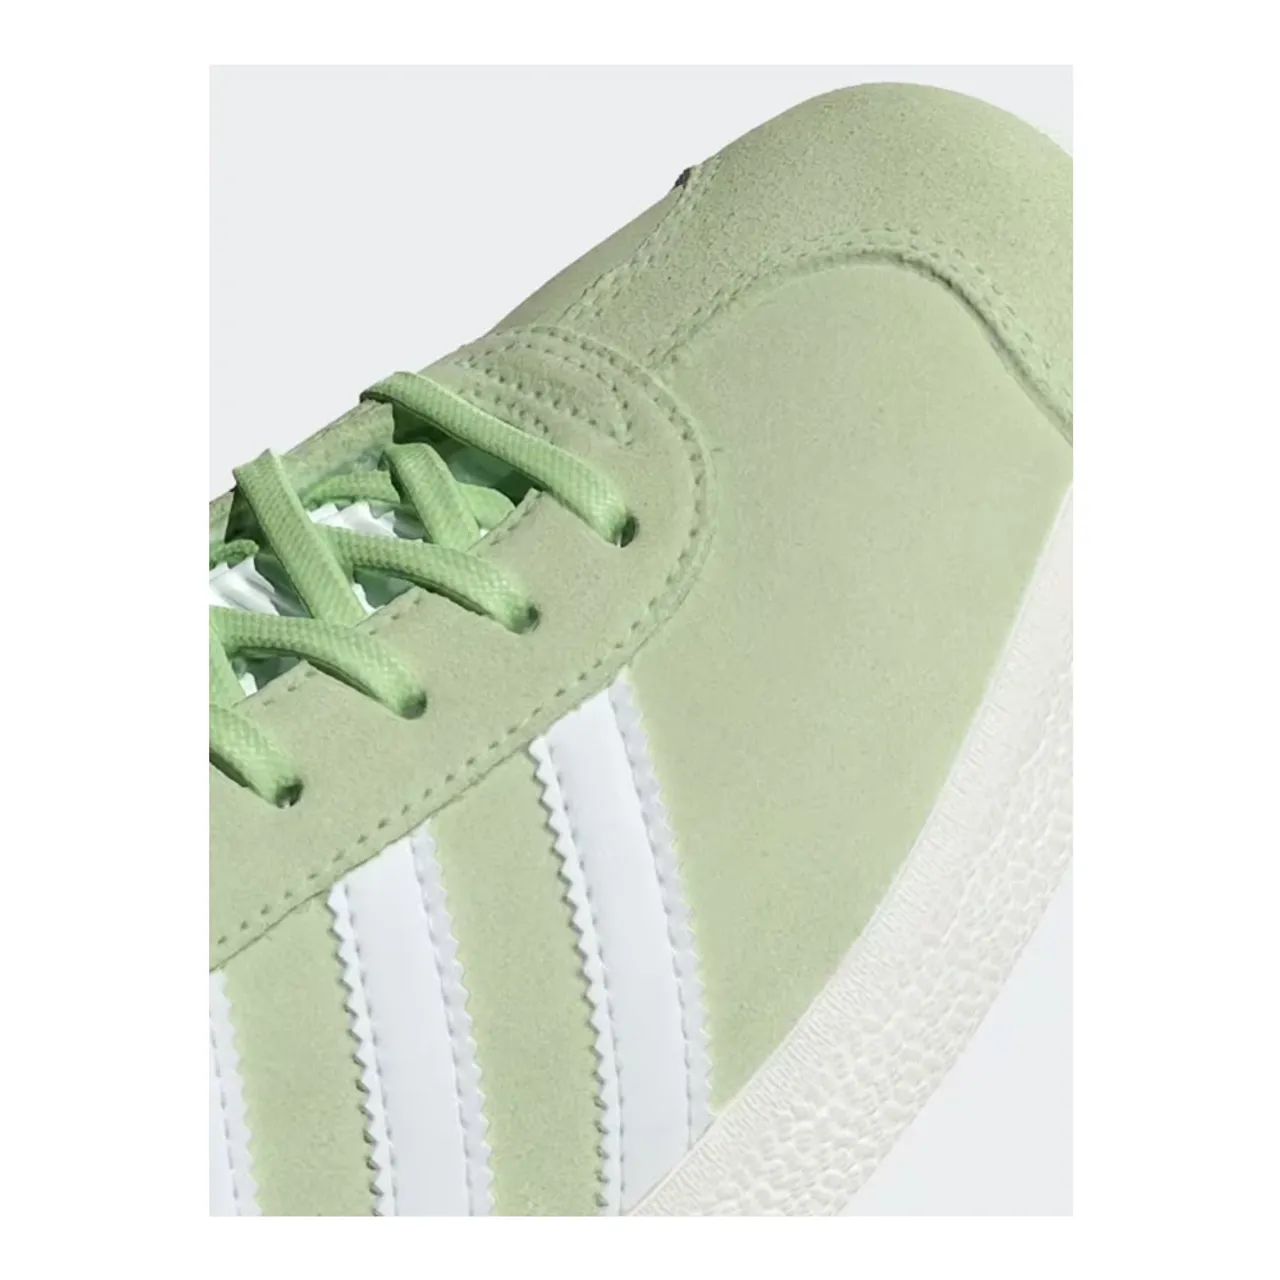 Adidas , Gazzelle Sneakers in Semi Green Spark ,Green male, Sizes: